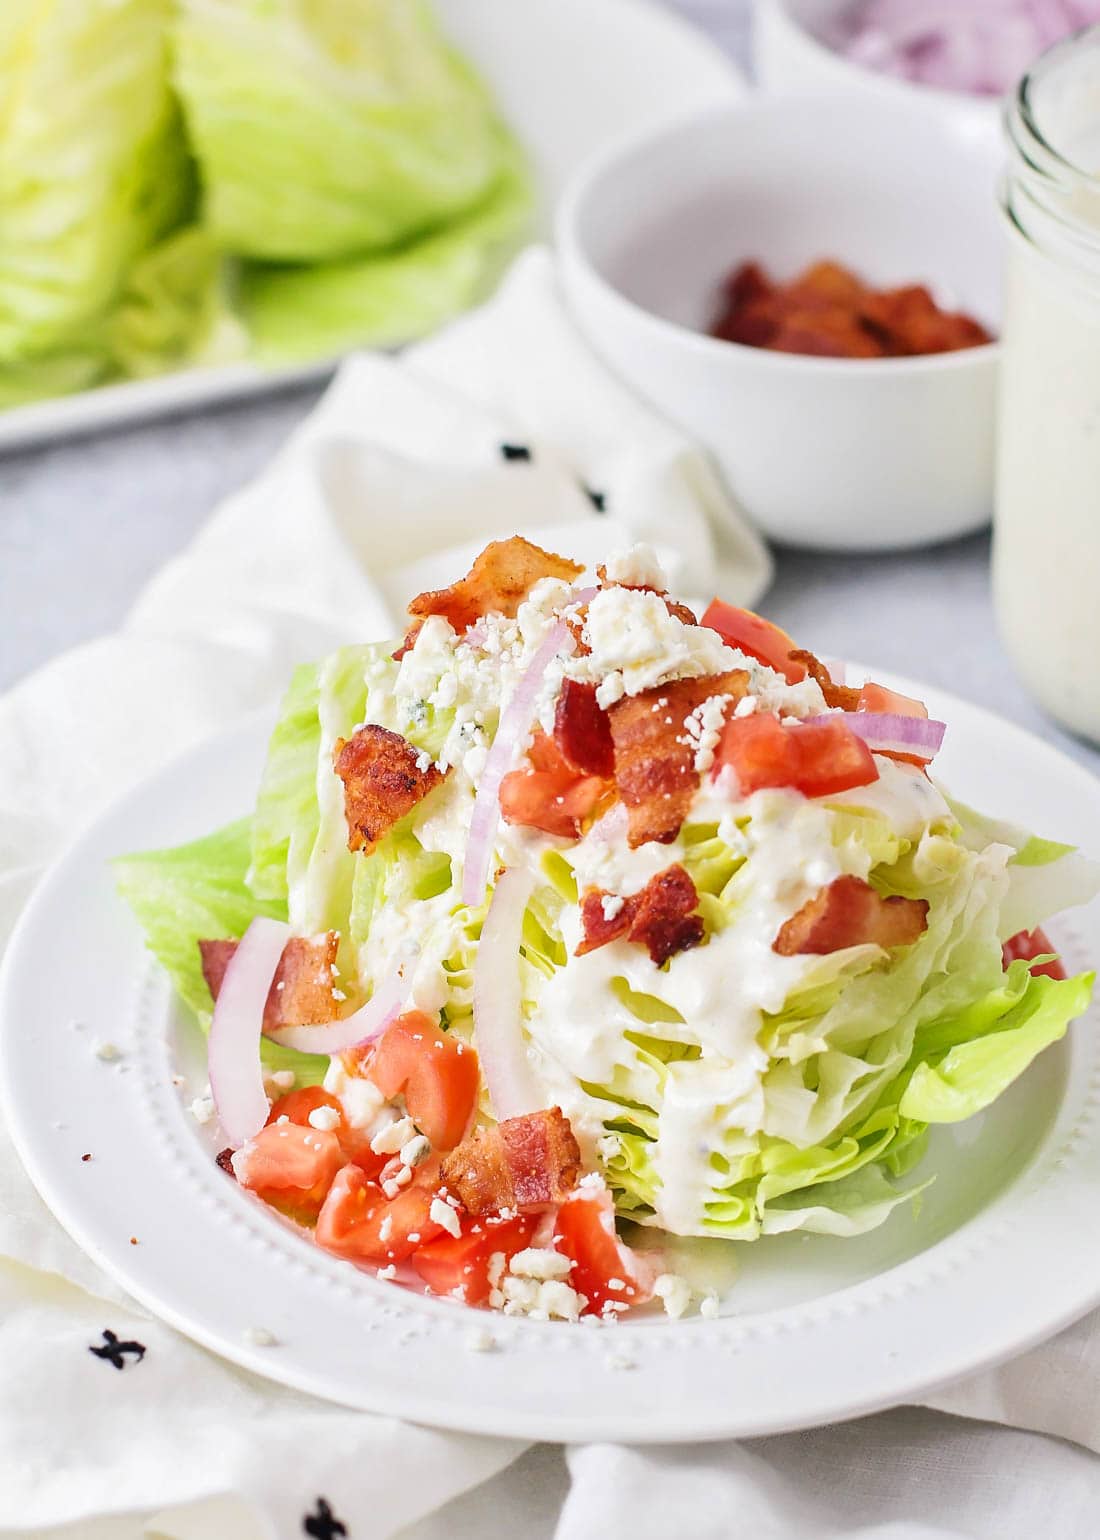 Wedge salad served on a white plate.